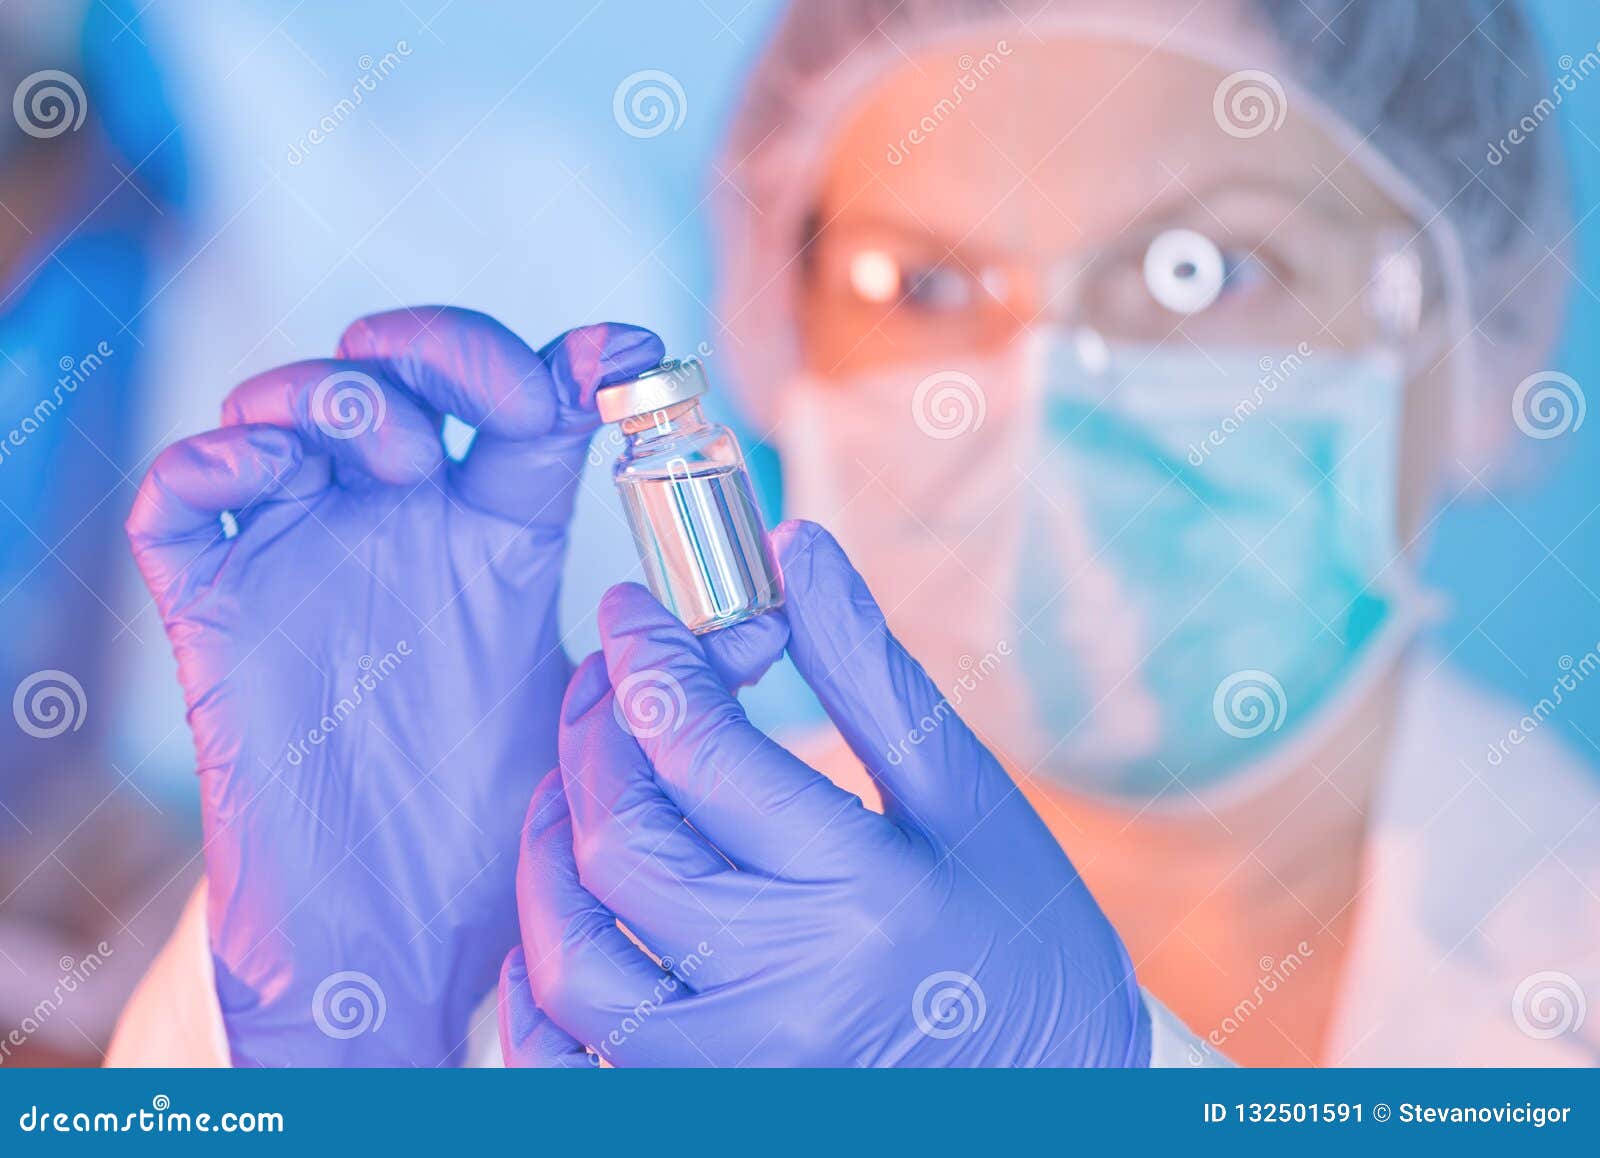 doctor and nurse analyzing unknown mmr vaccine